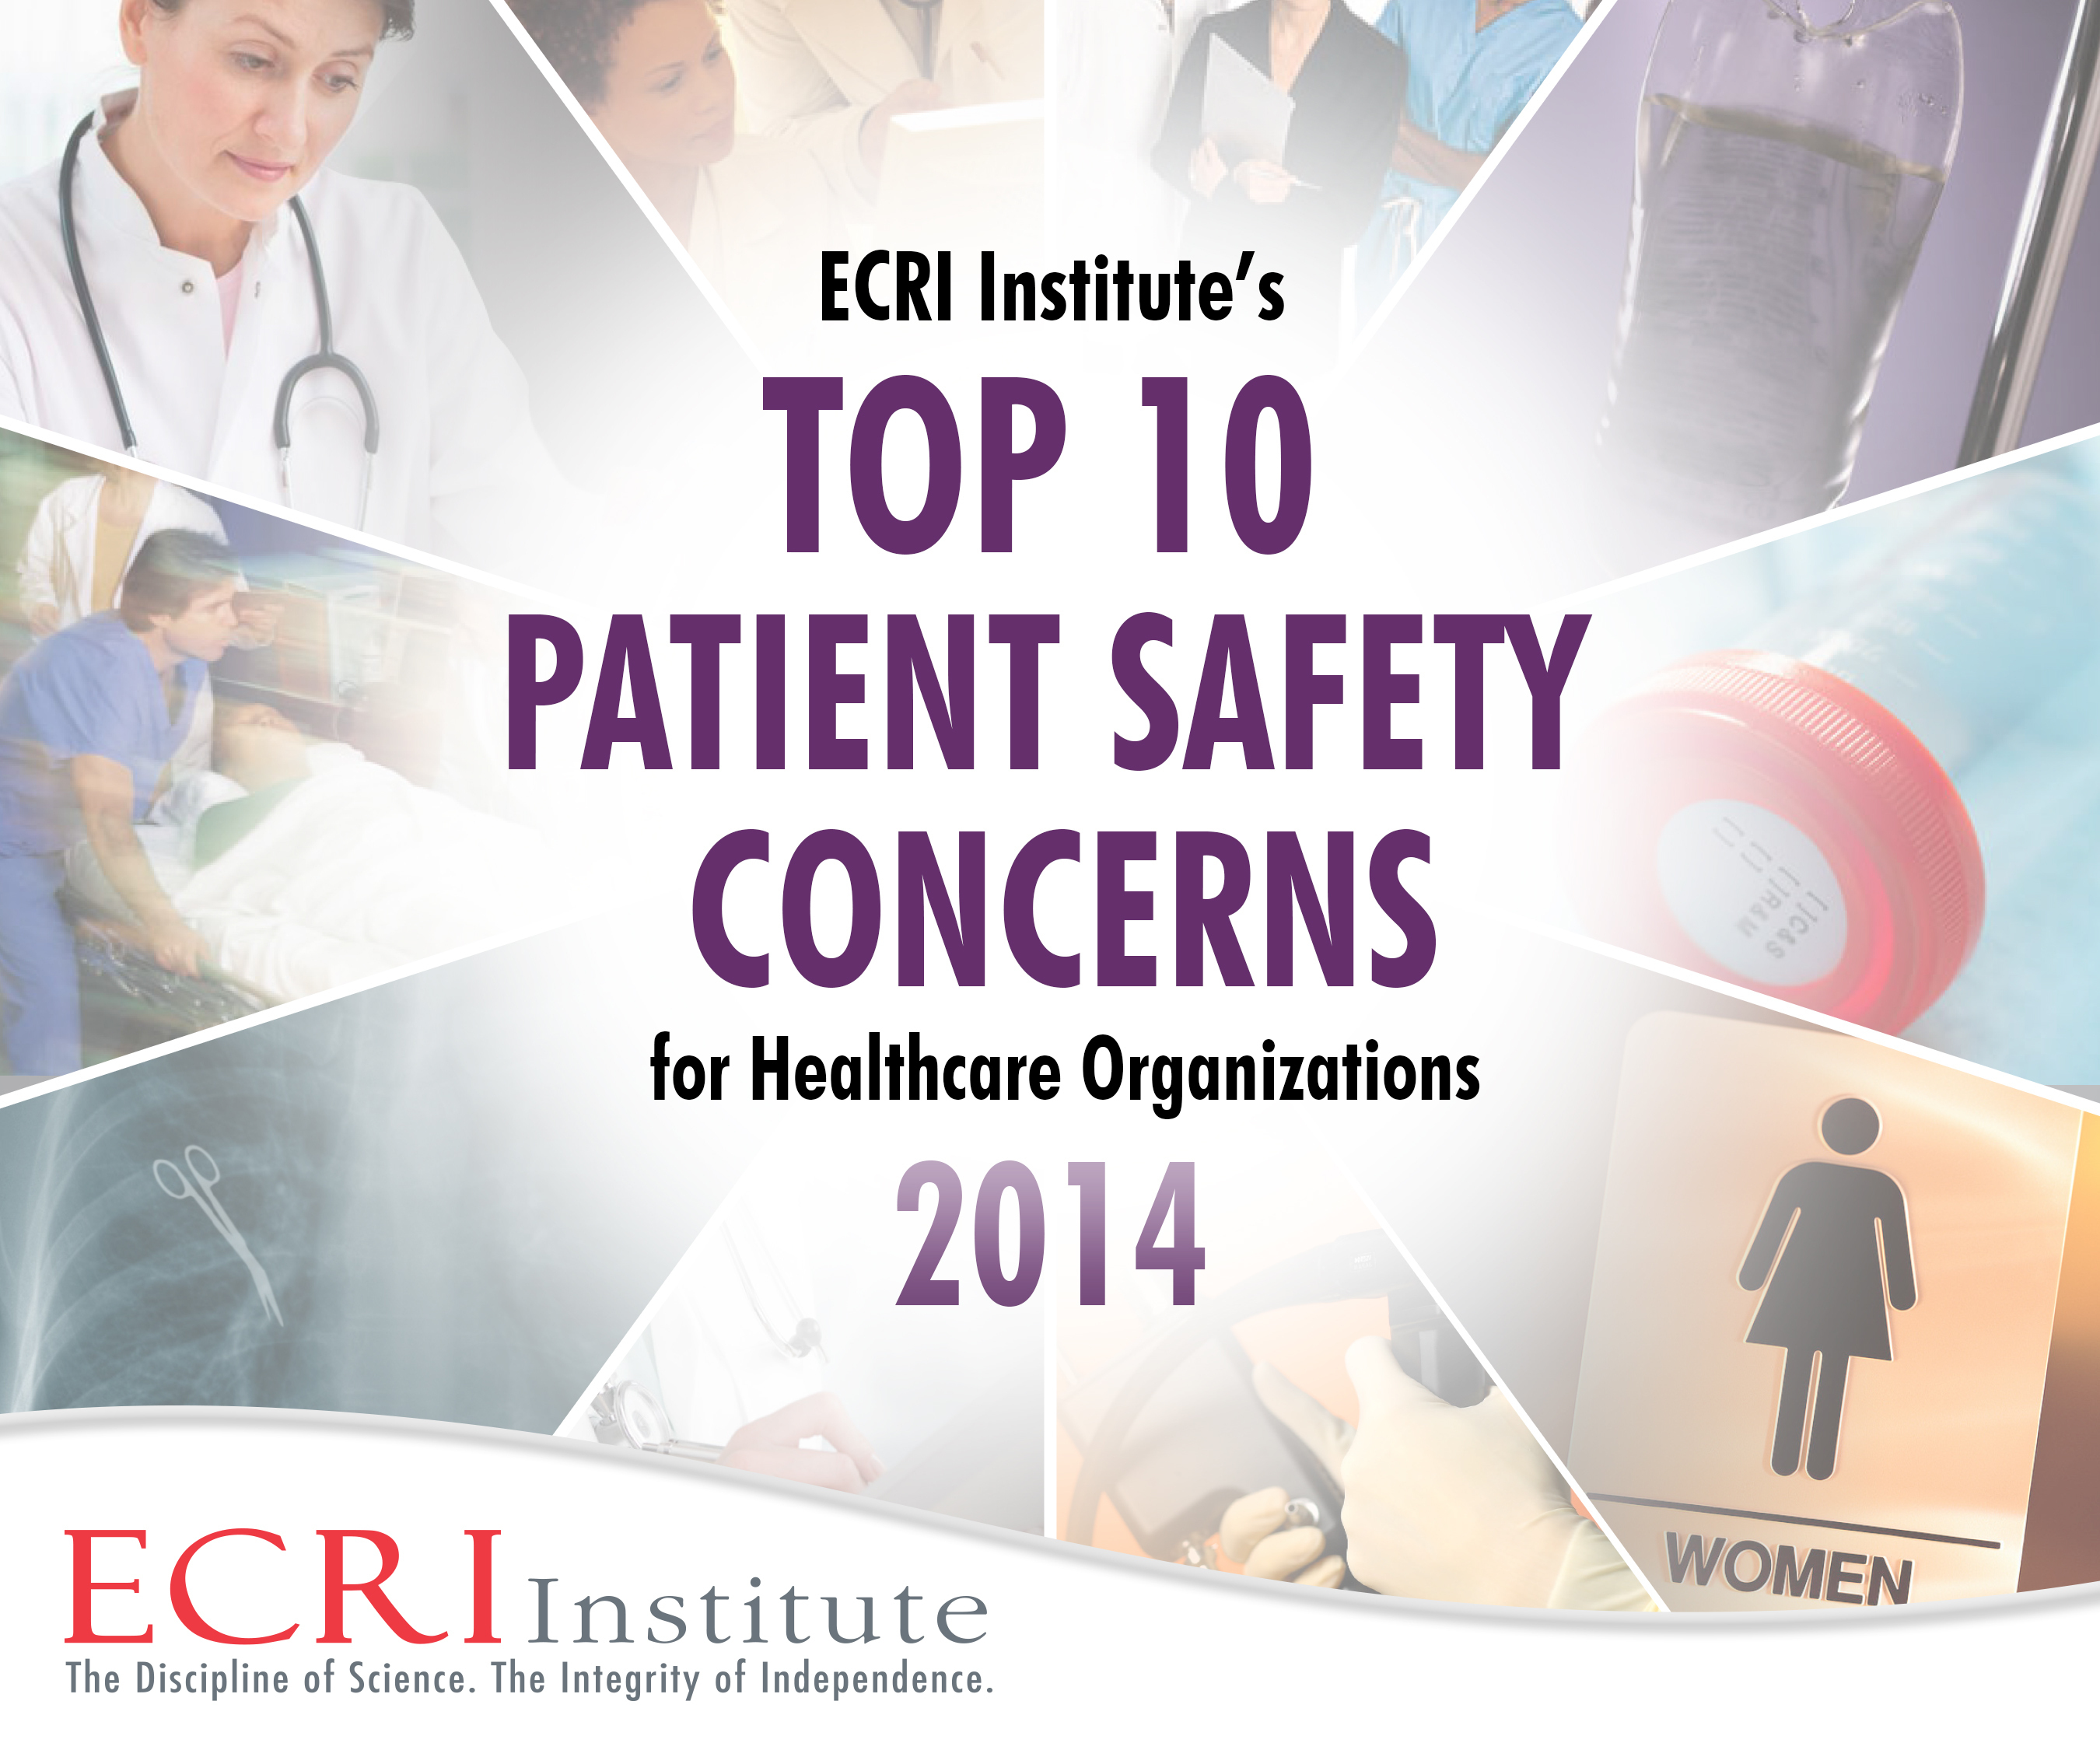 Health IT, care coordination, and drug shortages lead ECRI Institute’s 2014 List of Top 10 Patient Safety Concerns. Free download from ECRI Institute highlights root causes for serious patient safety events. (PRNewsFoto/ECRI Institute)